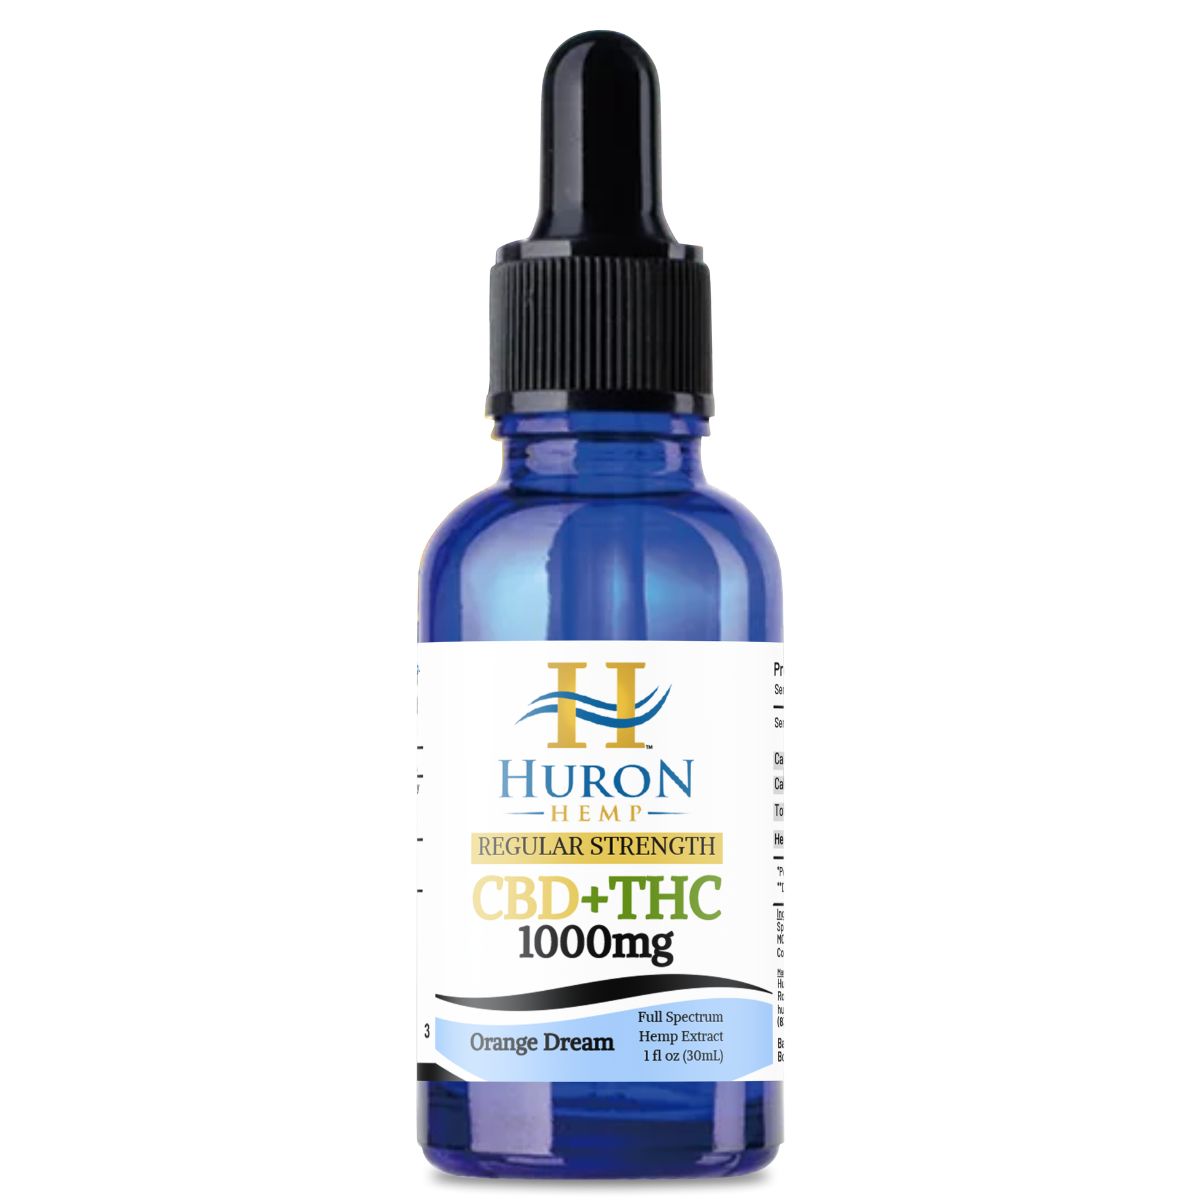 Traditional Full Spectrum CBD Oil Products